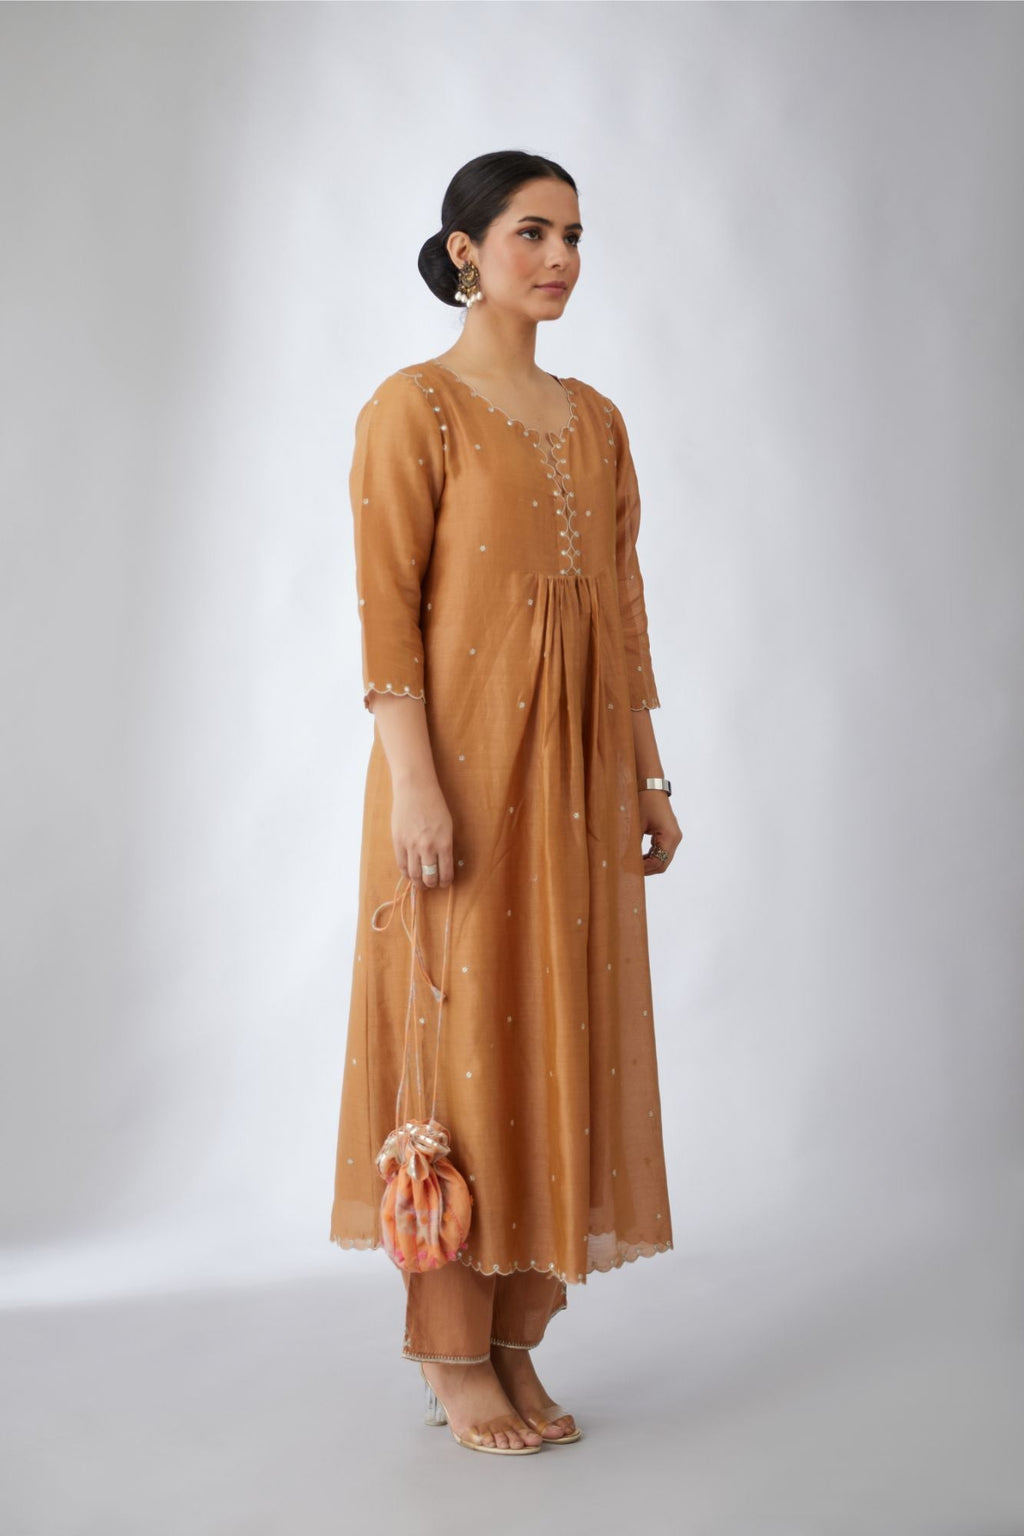 Silk chanderi Kurta dress set with all-over delicately embroidered silver zari flowers and scalloped edges, highlighted with hand attached mirrors